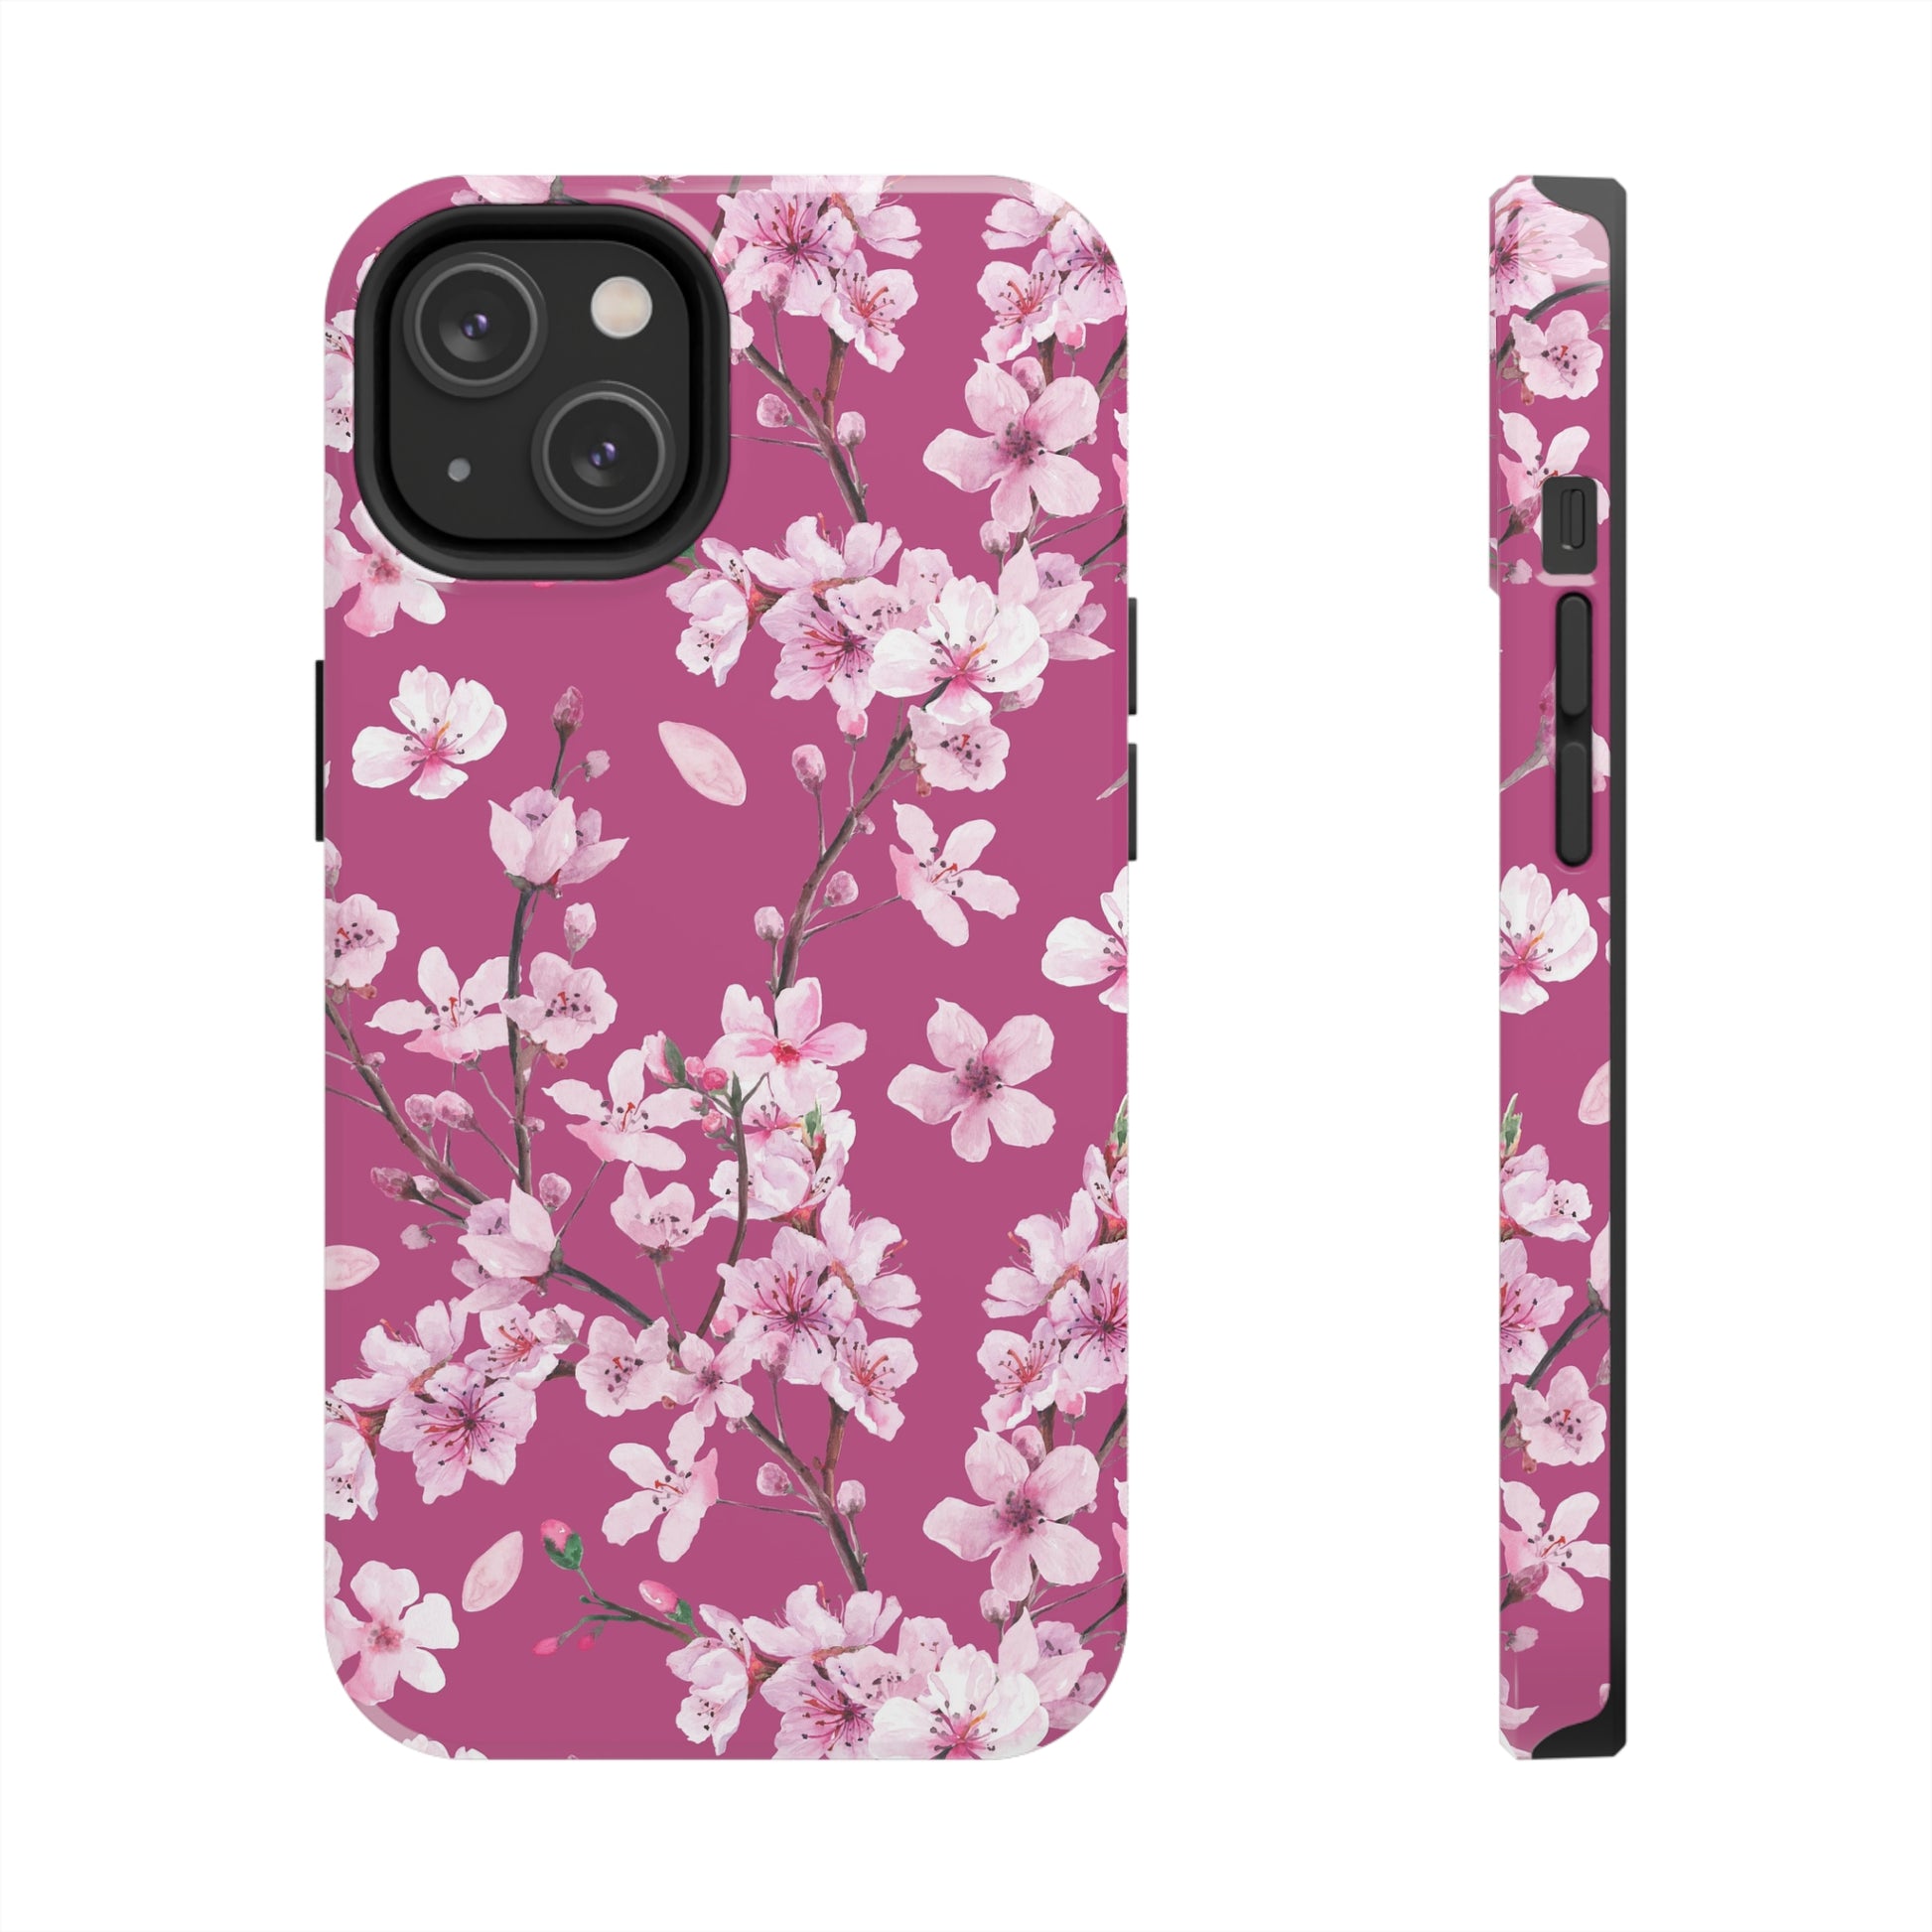 pink cherry blossom iphone case